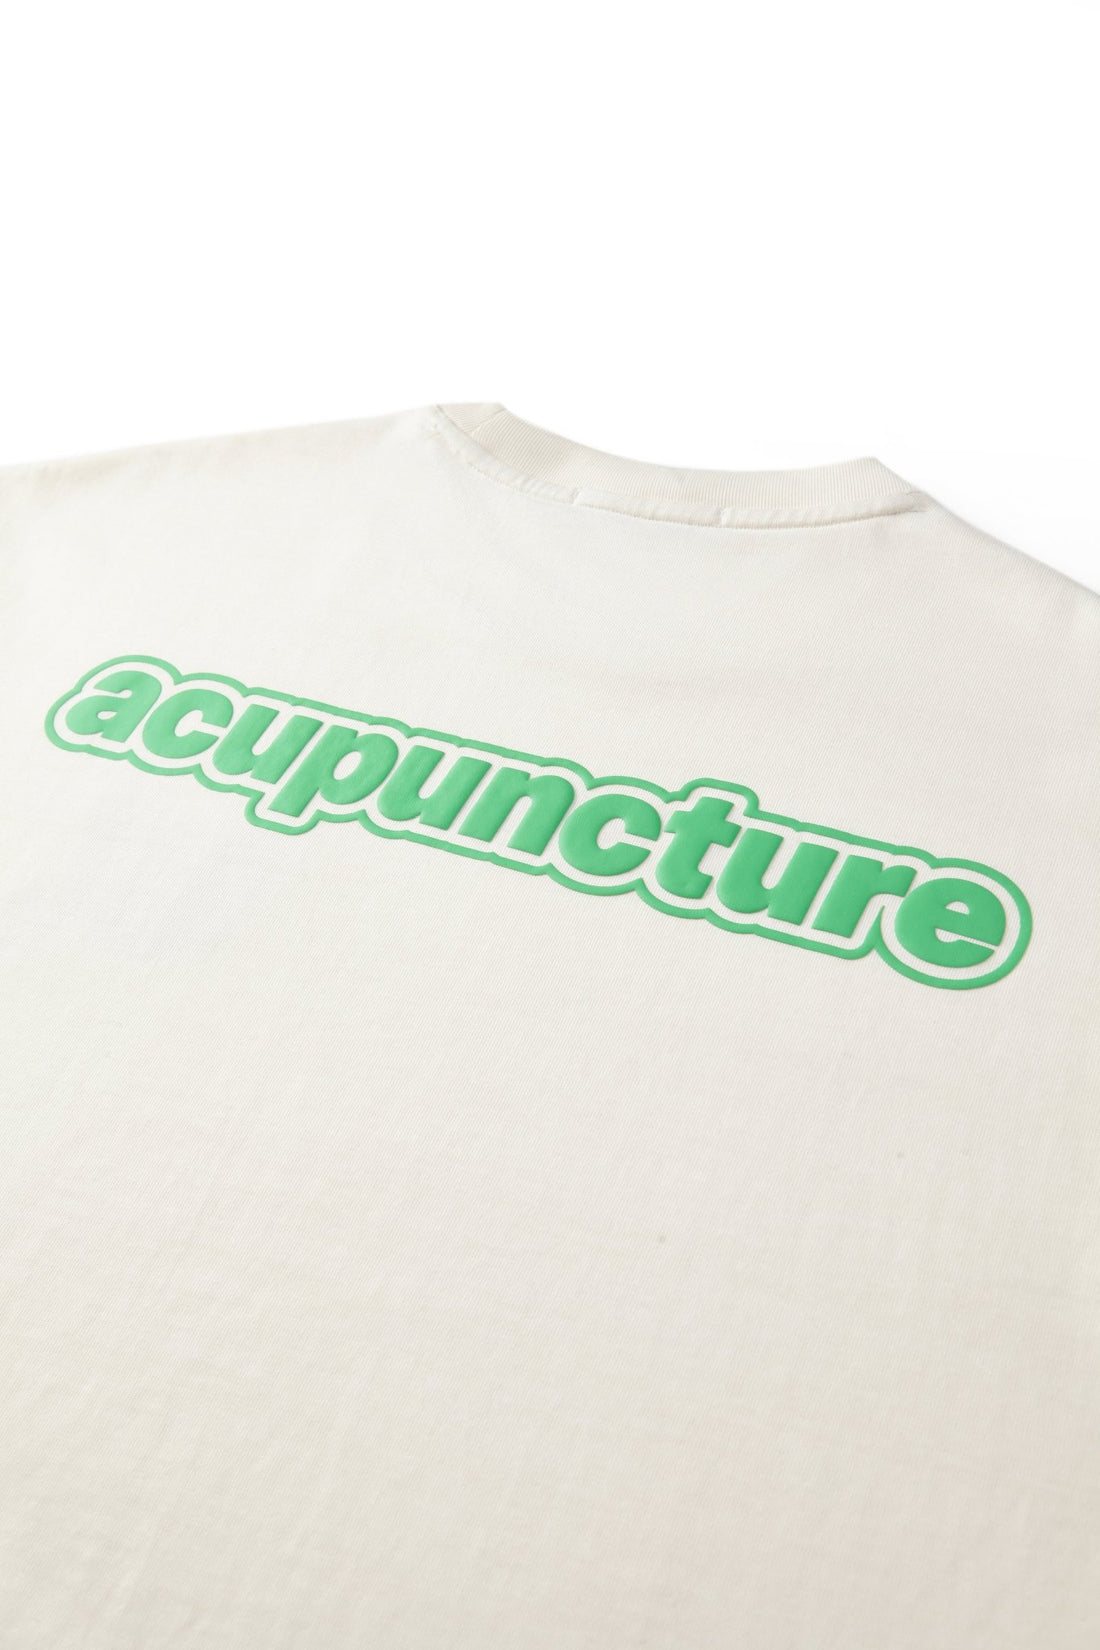 THE EARTH TSHIRT CREAM Acupuncture